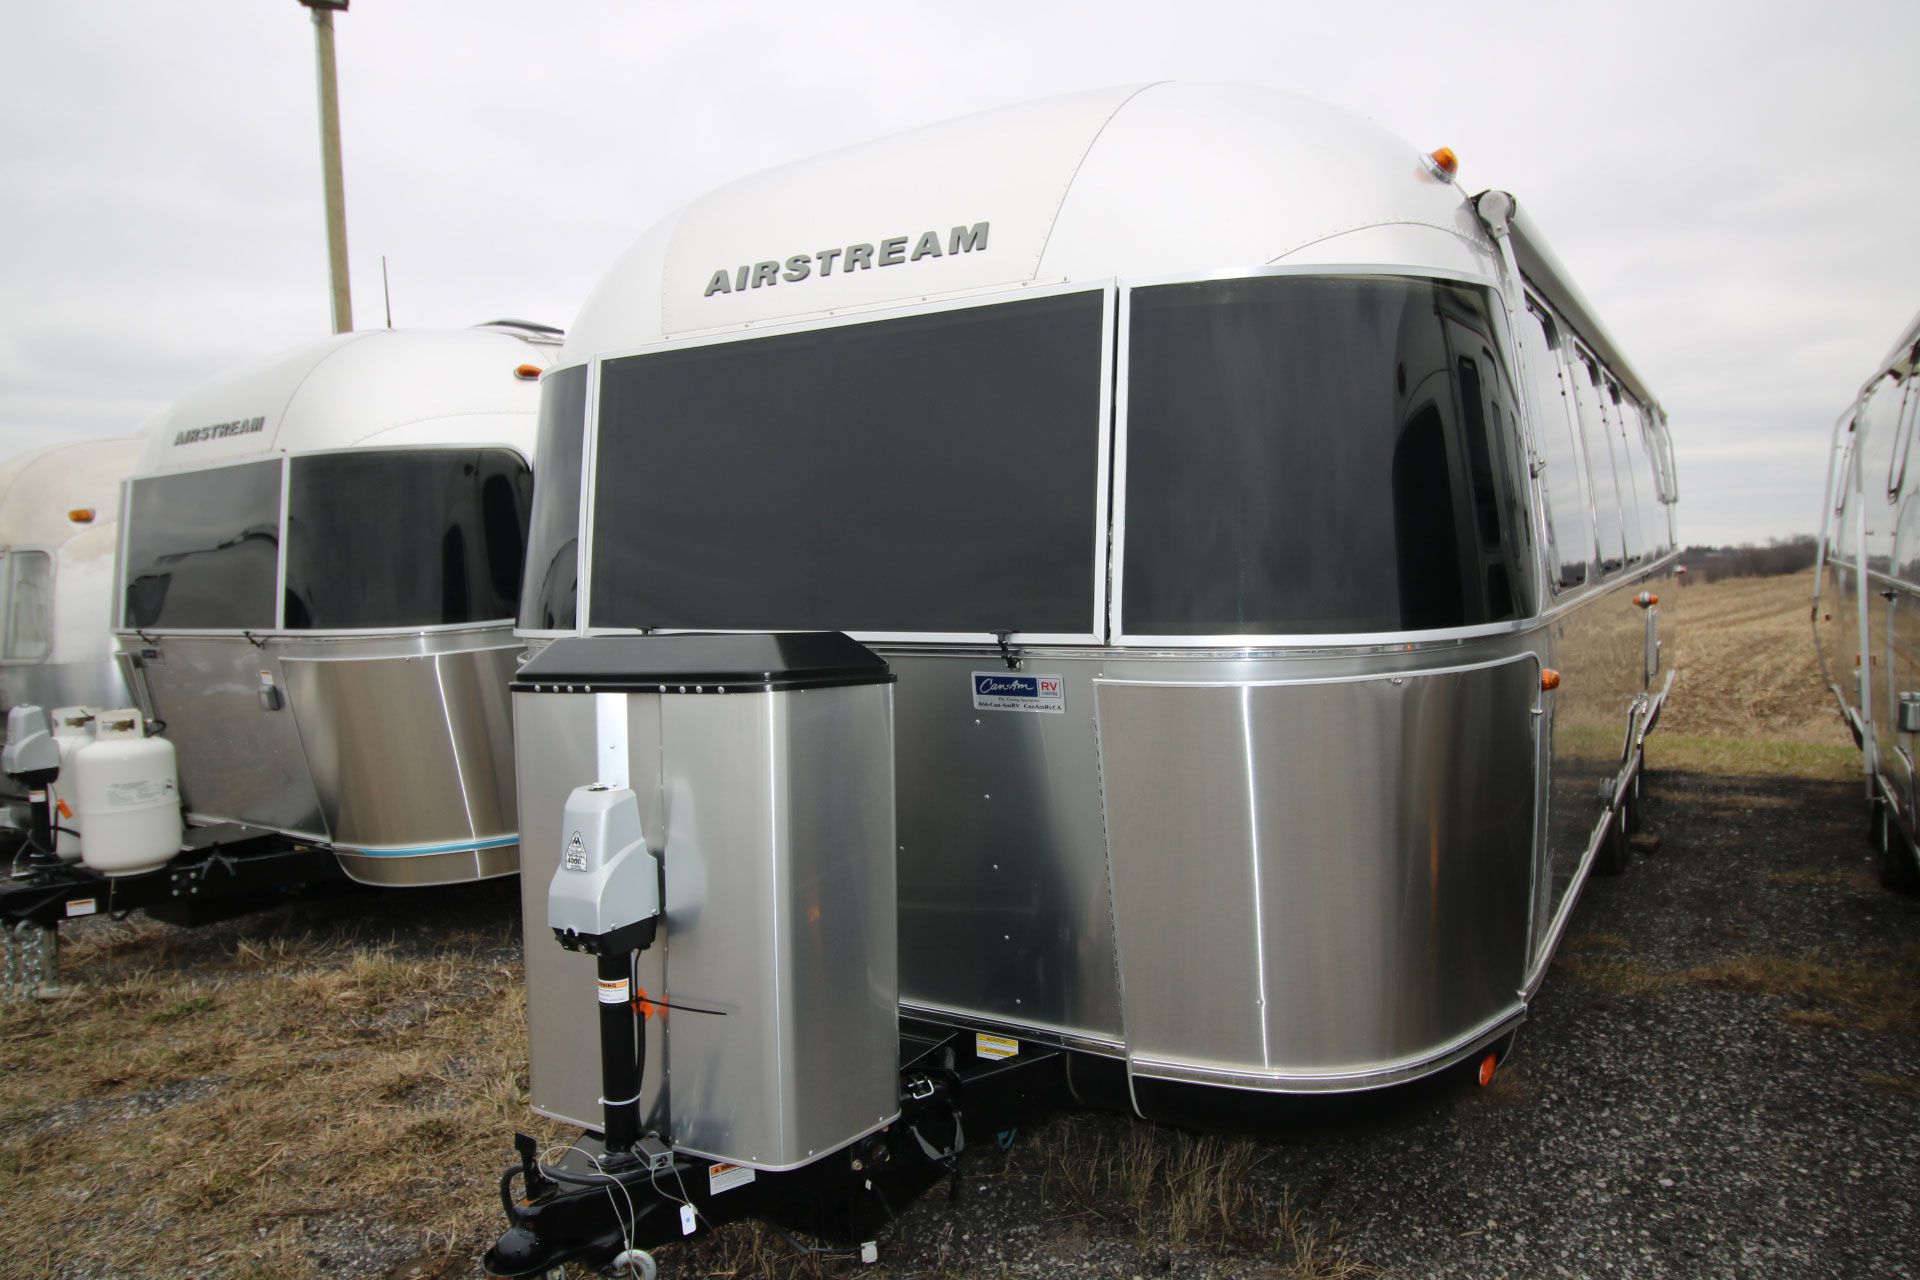 Used Airstream trailers for sale in ON - TrailersMarket.com